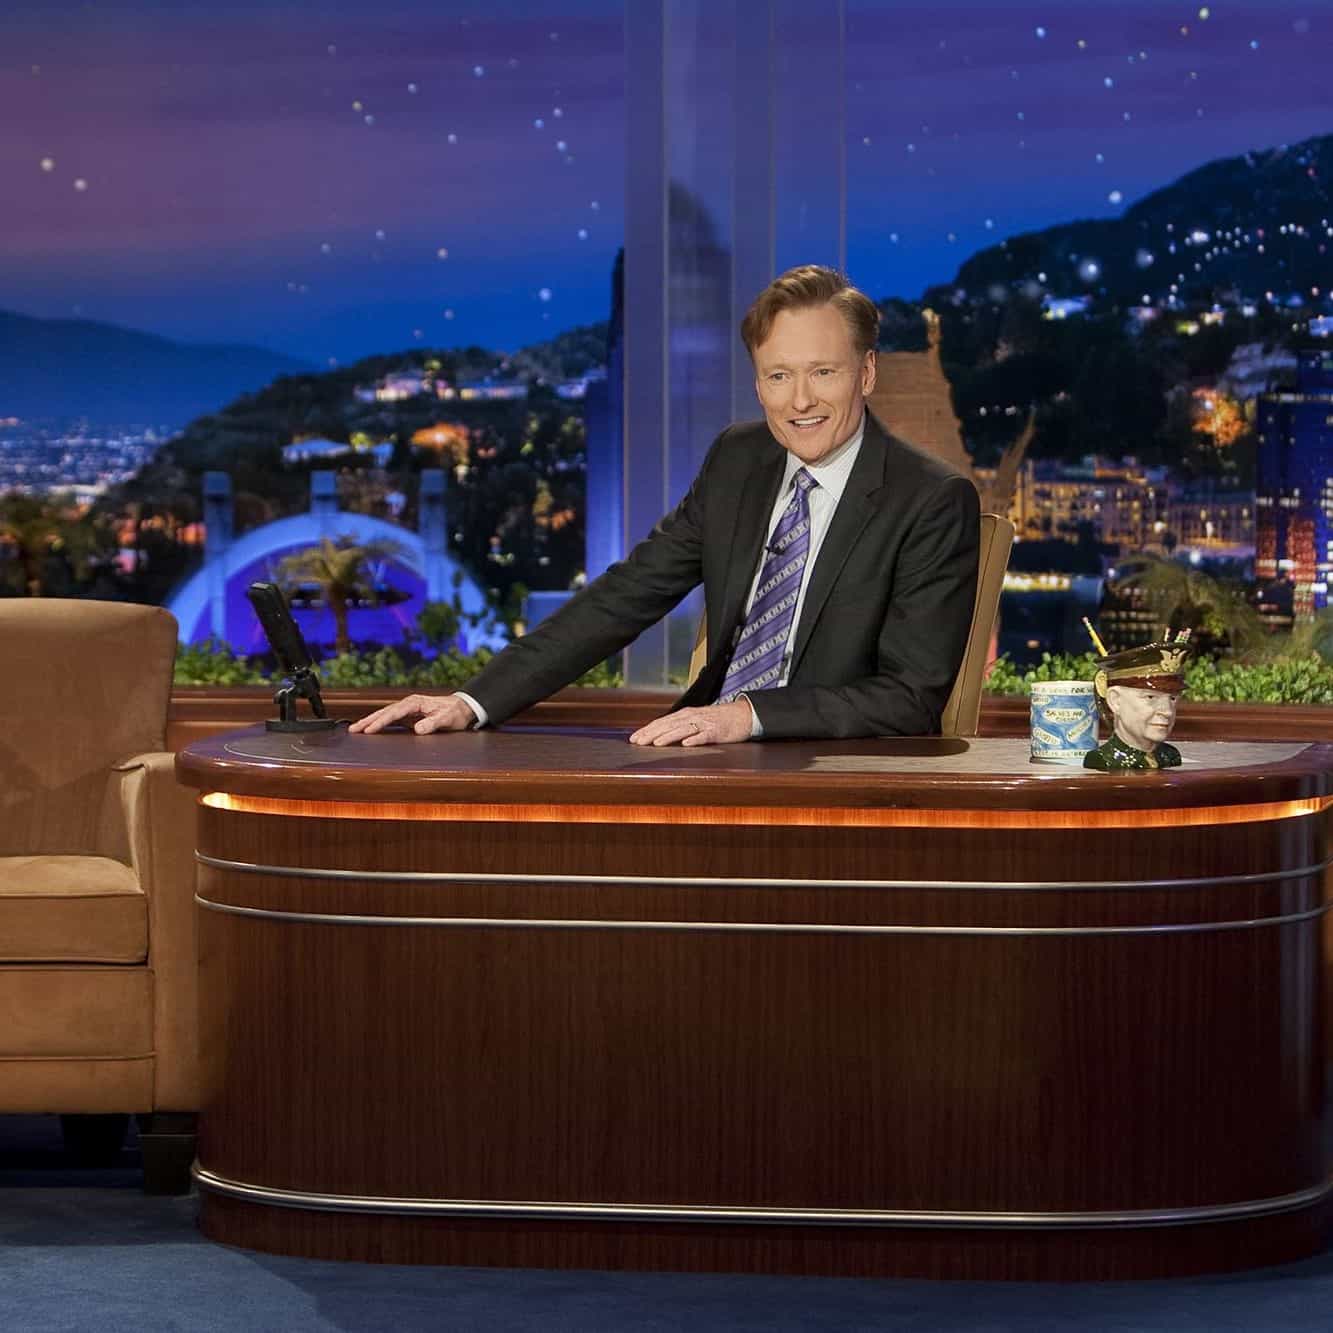 Conan O'Brien fulfilled his lifelong dream by taking over "The Tonight Show" from Jay Leno in 2009